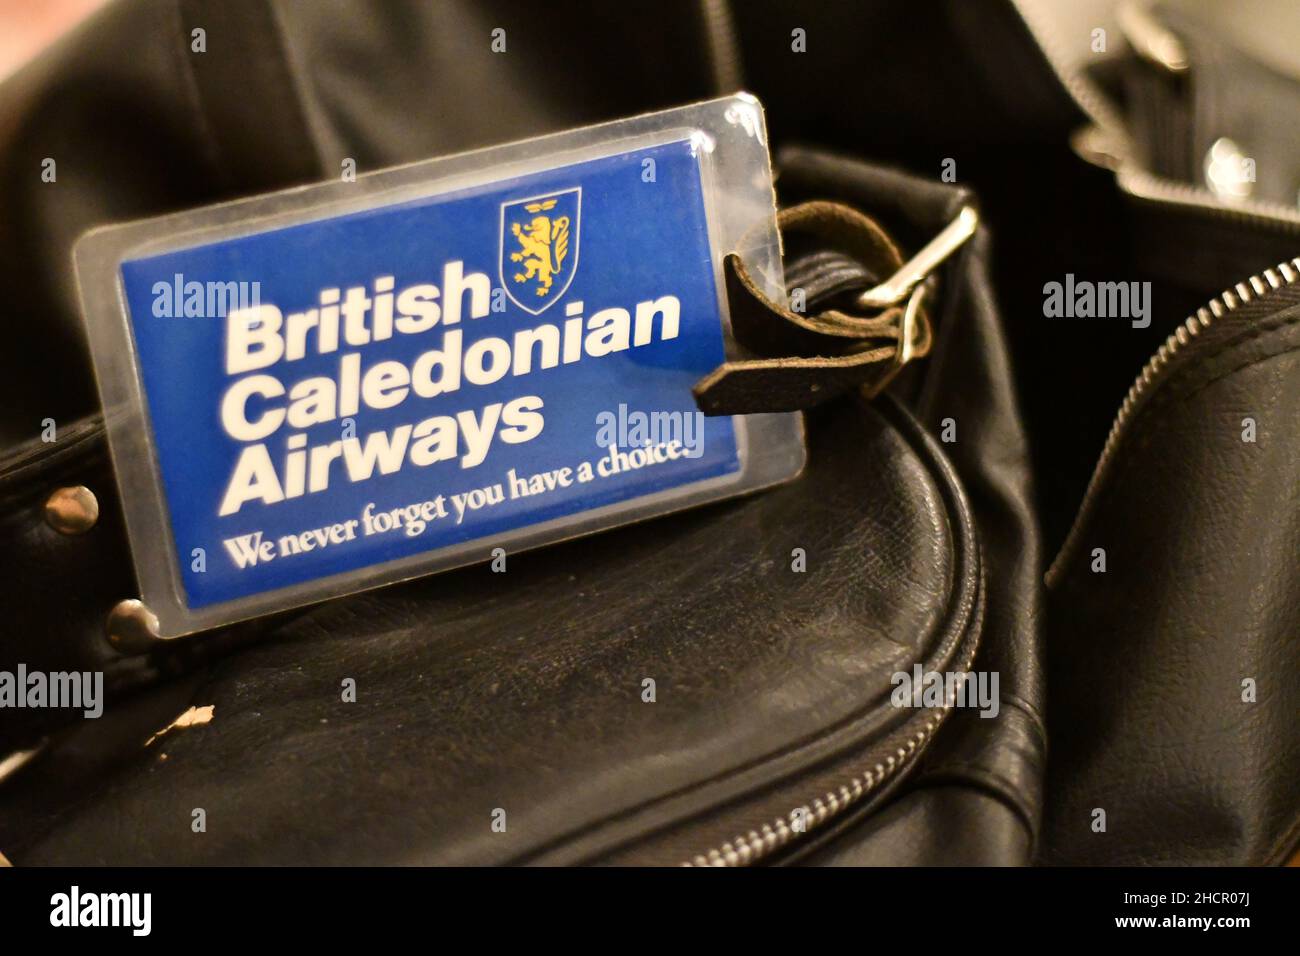 A British Caledonian Airways travel badge, tag, on a black leather travel bag with the slogan we never forget you have a choice Stock Photo